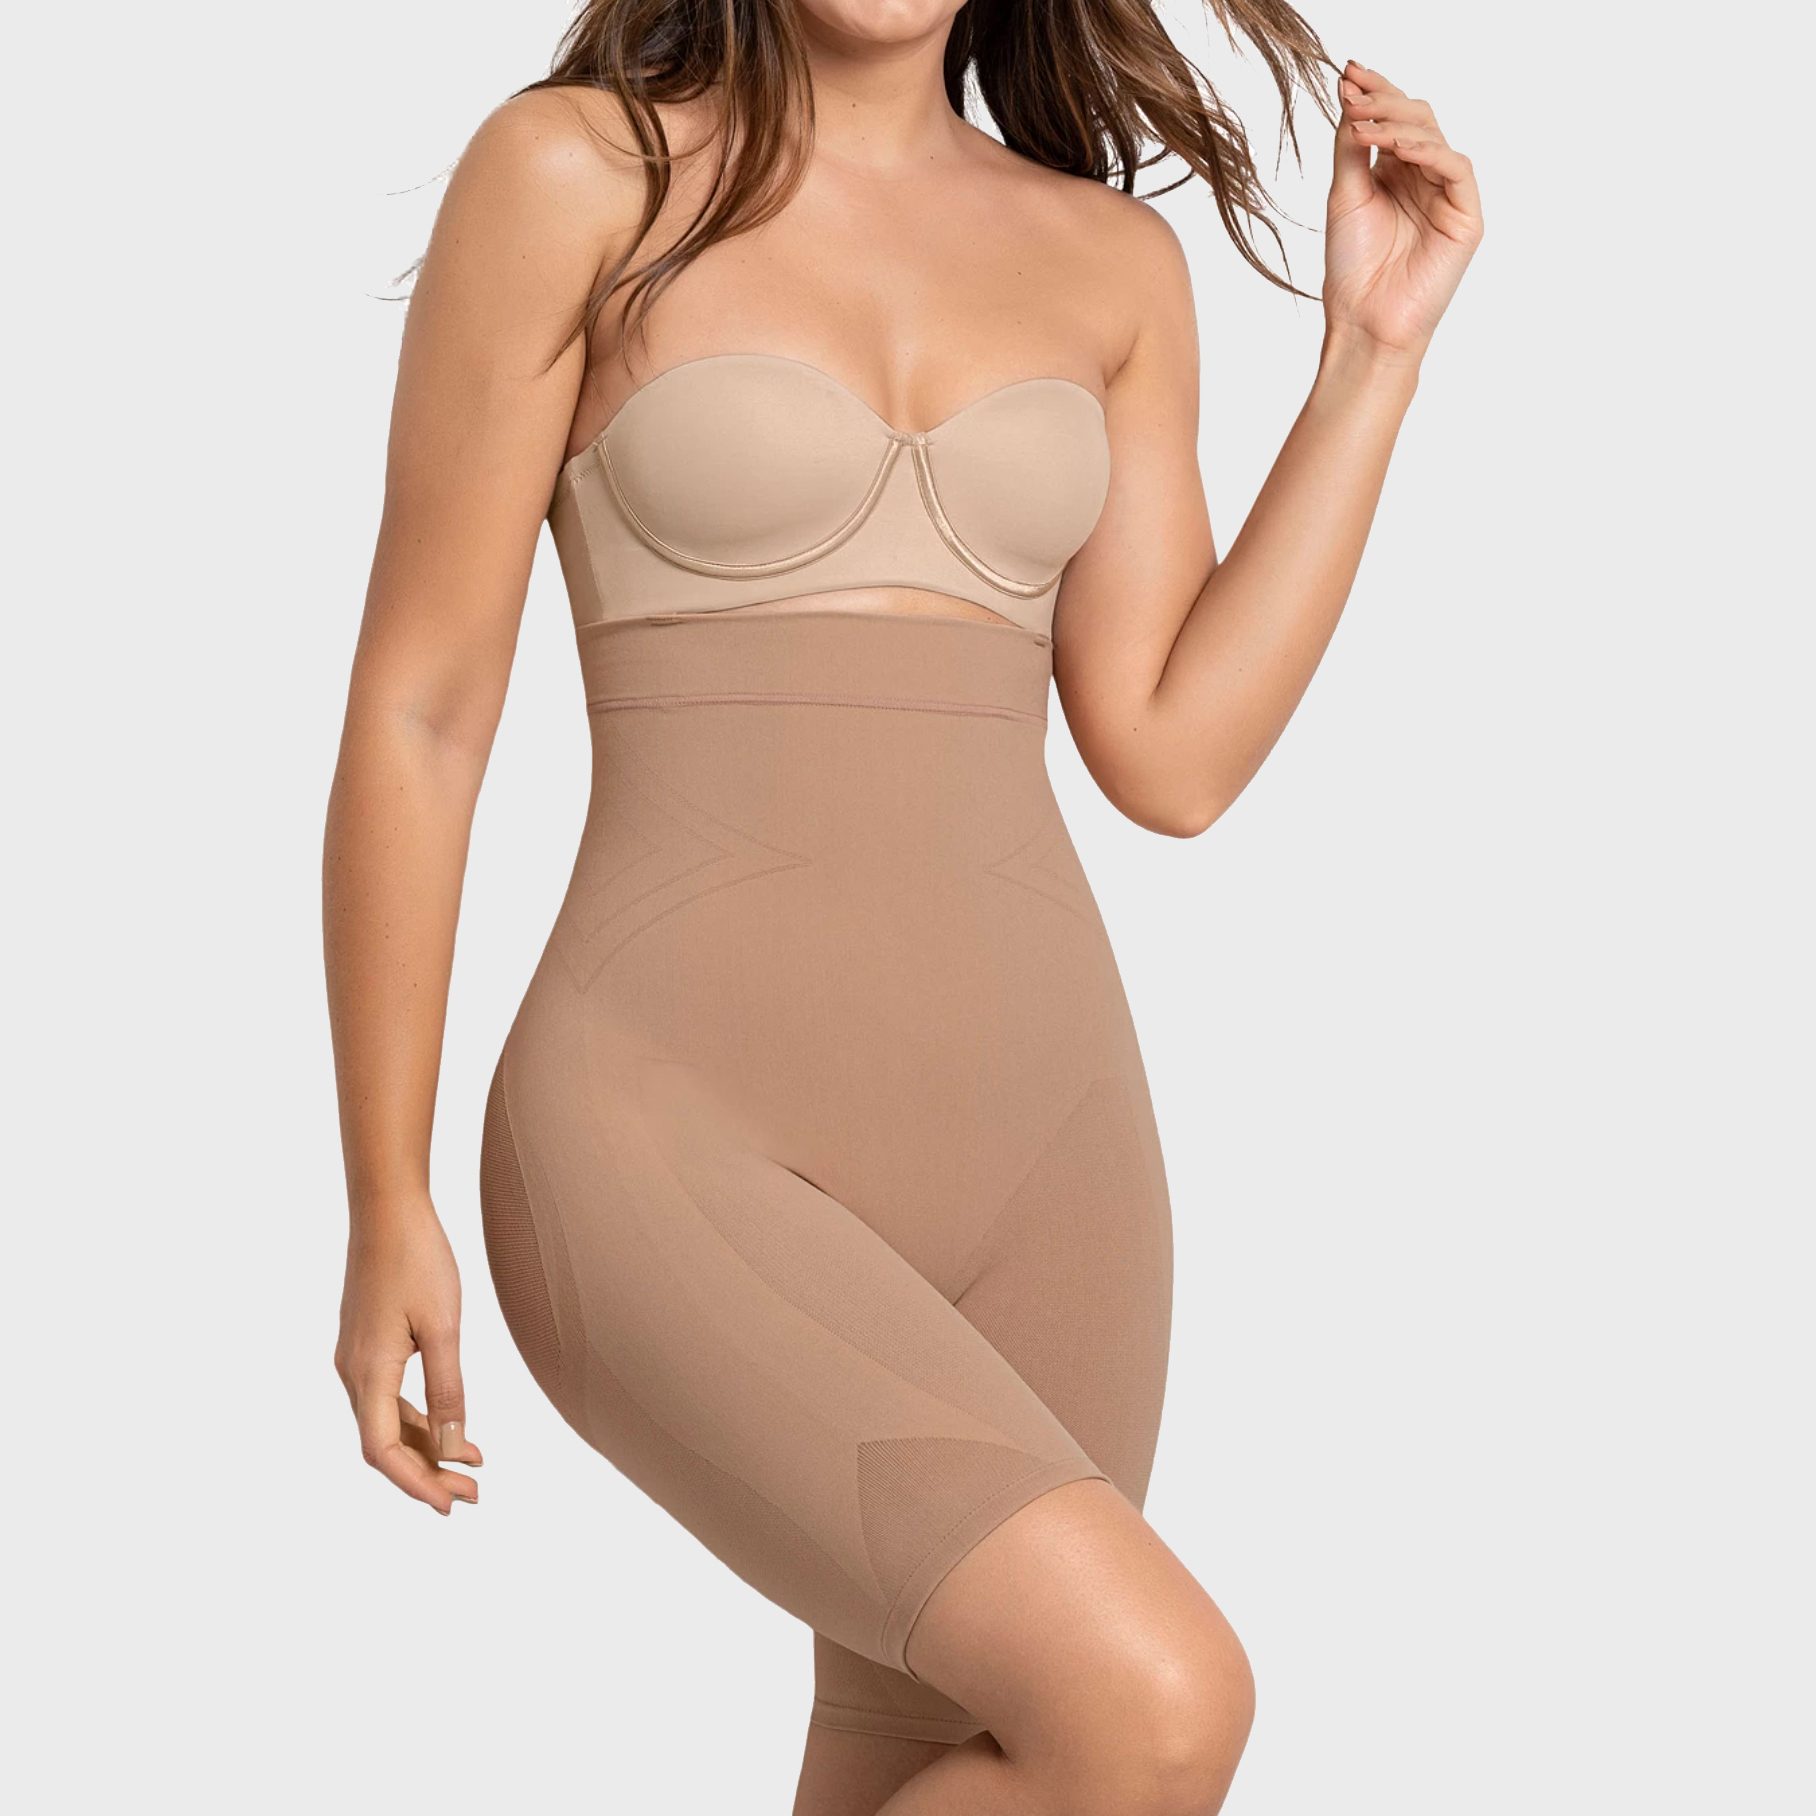 Skims Maternity Shapewear Try-On: Unbelievable Fit for Pregnant Women